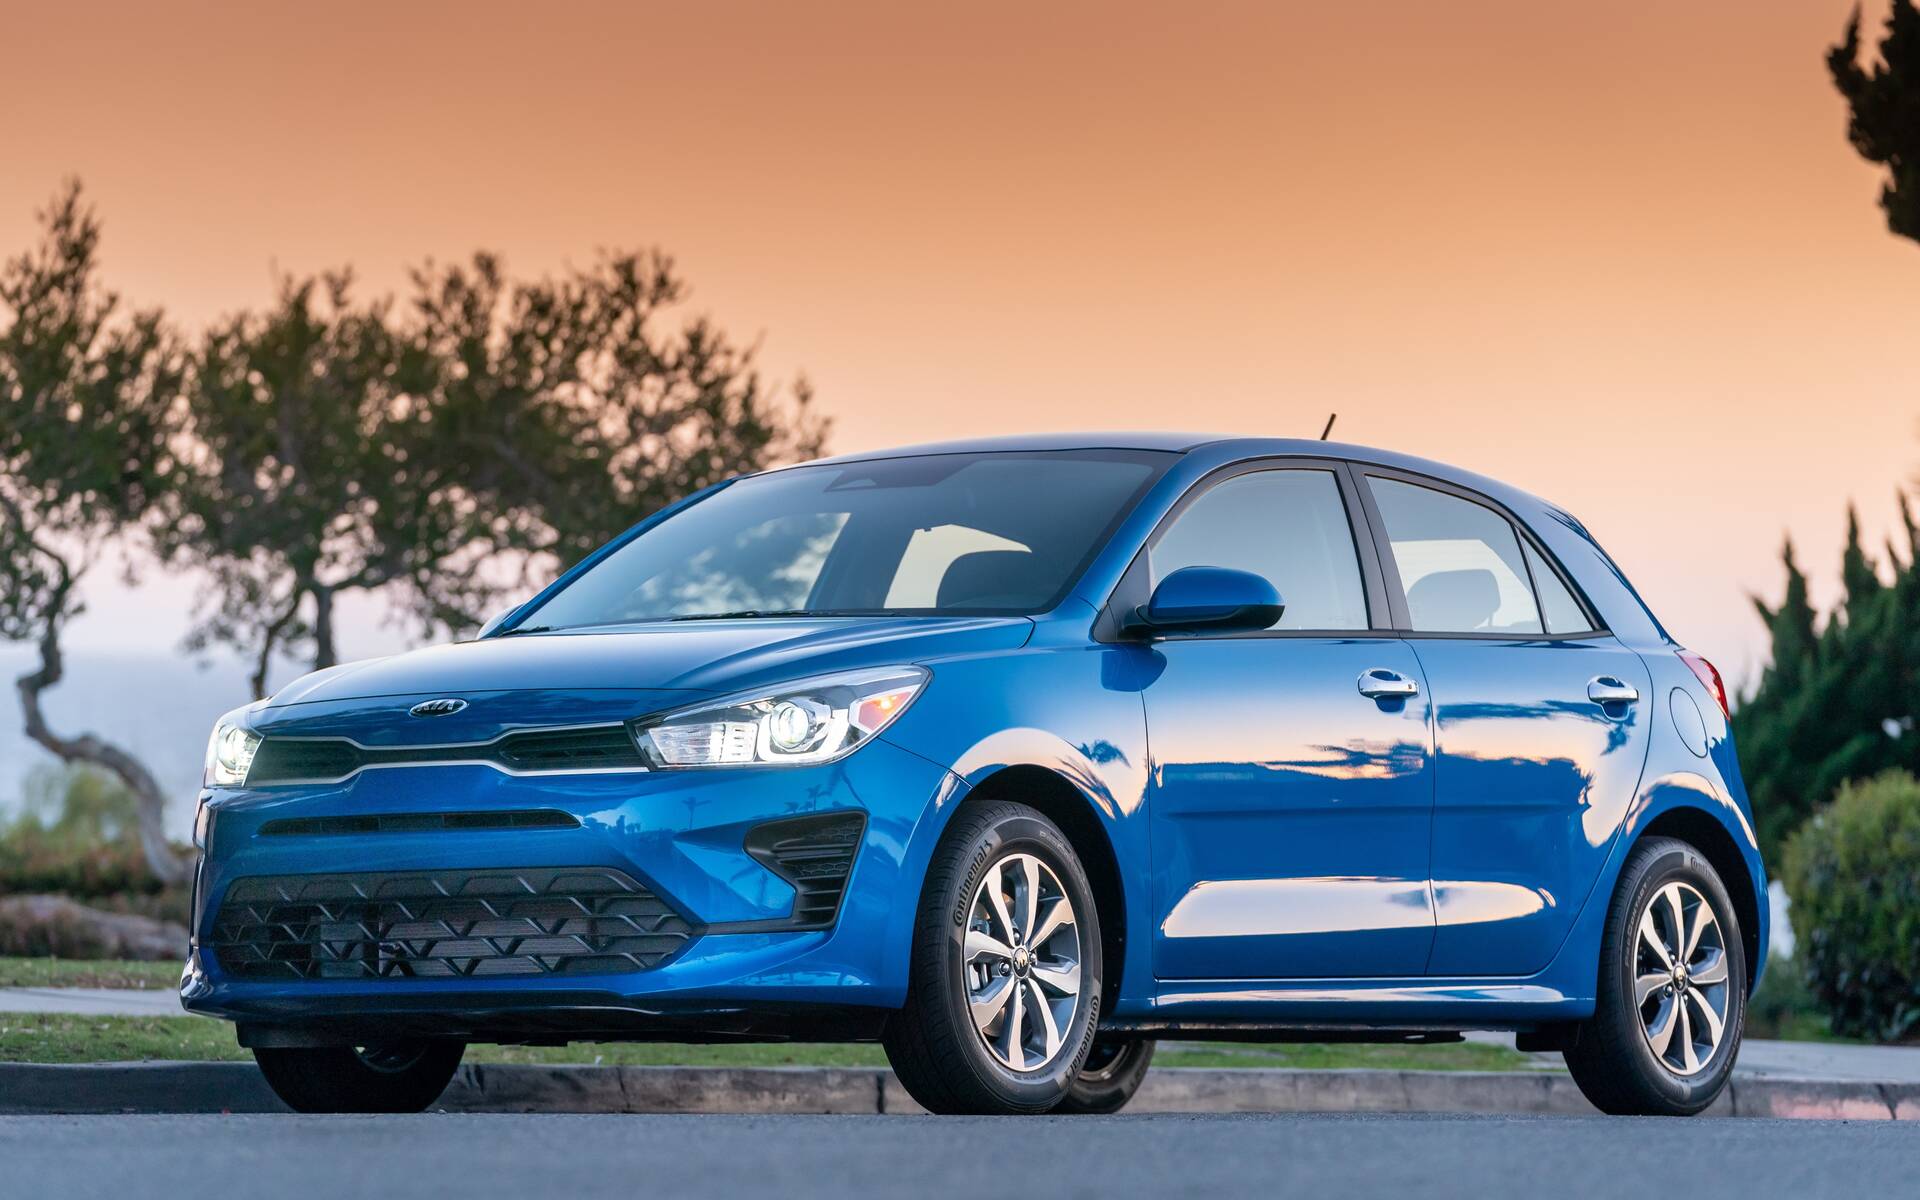 2023 Kia Rio - News, reviews, picture galleries and videos - The Car Guide